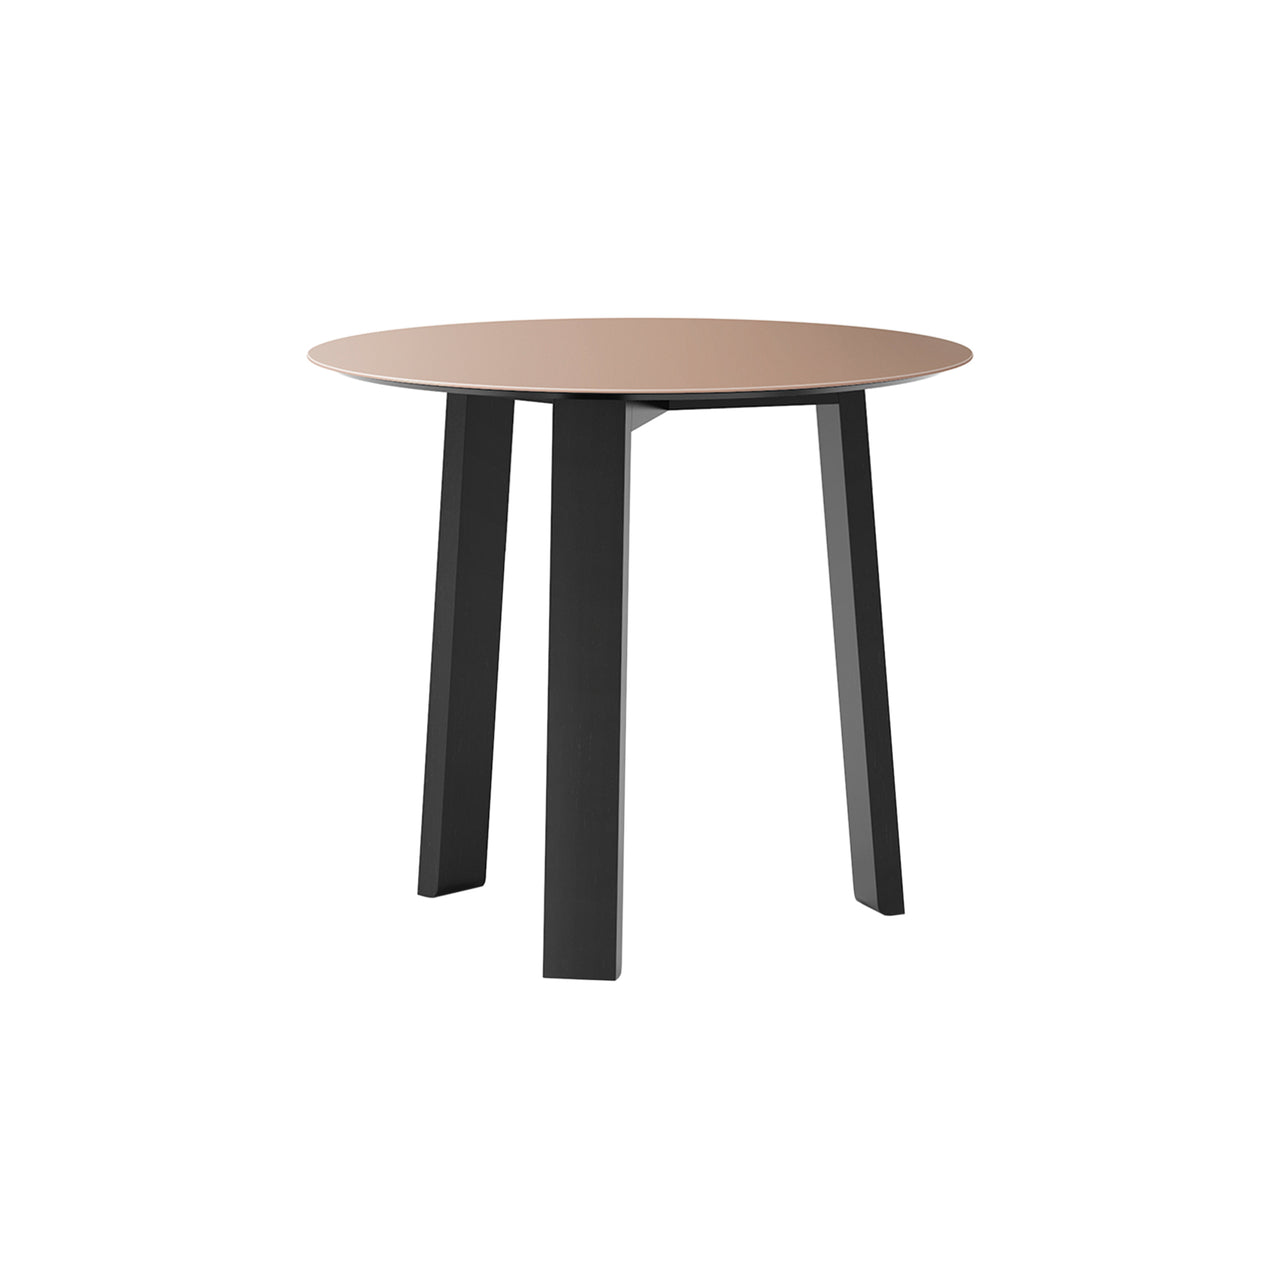 Stockholm Round Side Table: Low + Pale Rose Anodised Aluminum + Ebony Stained Oak